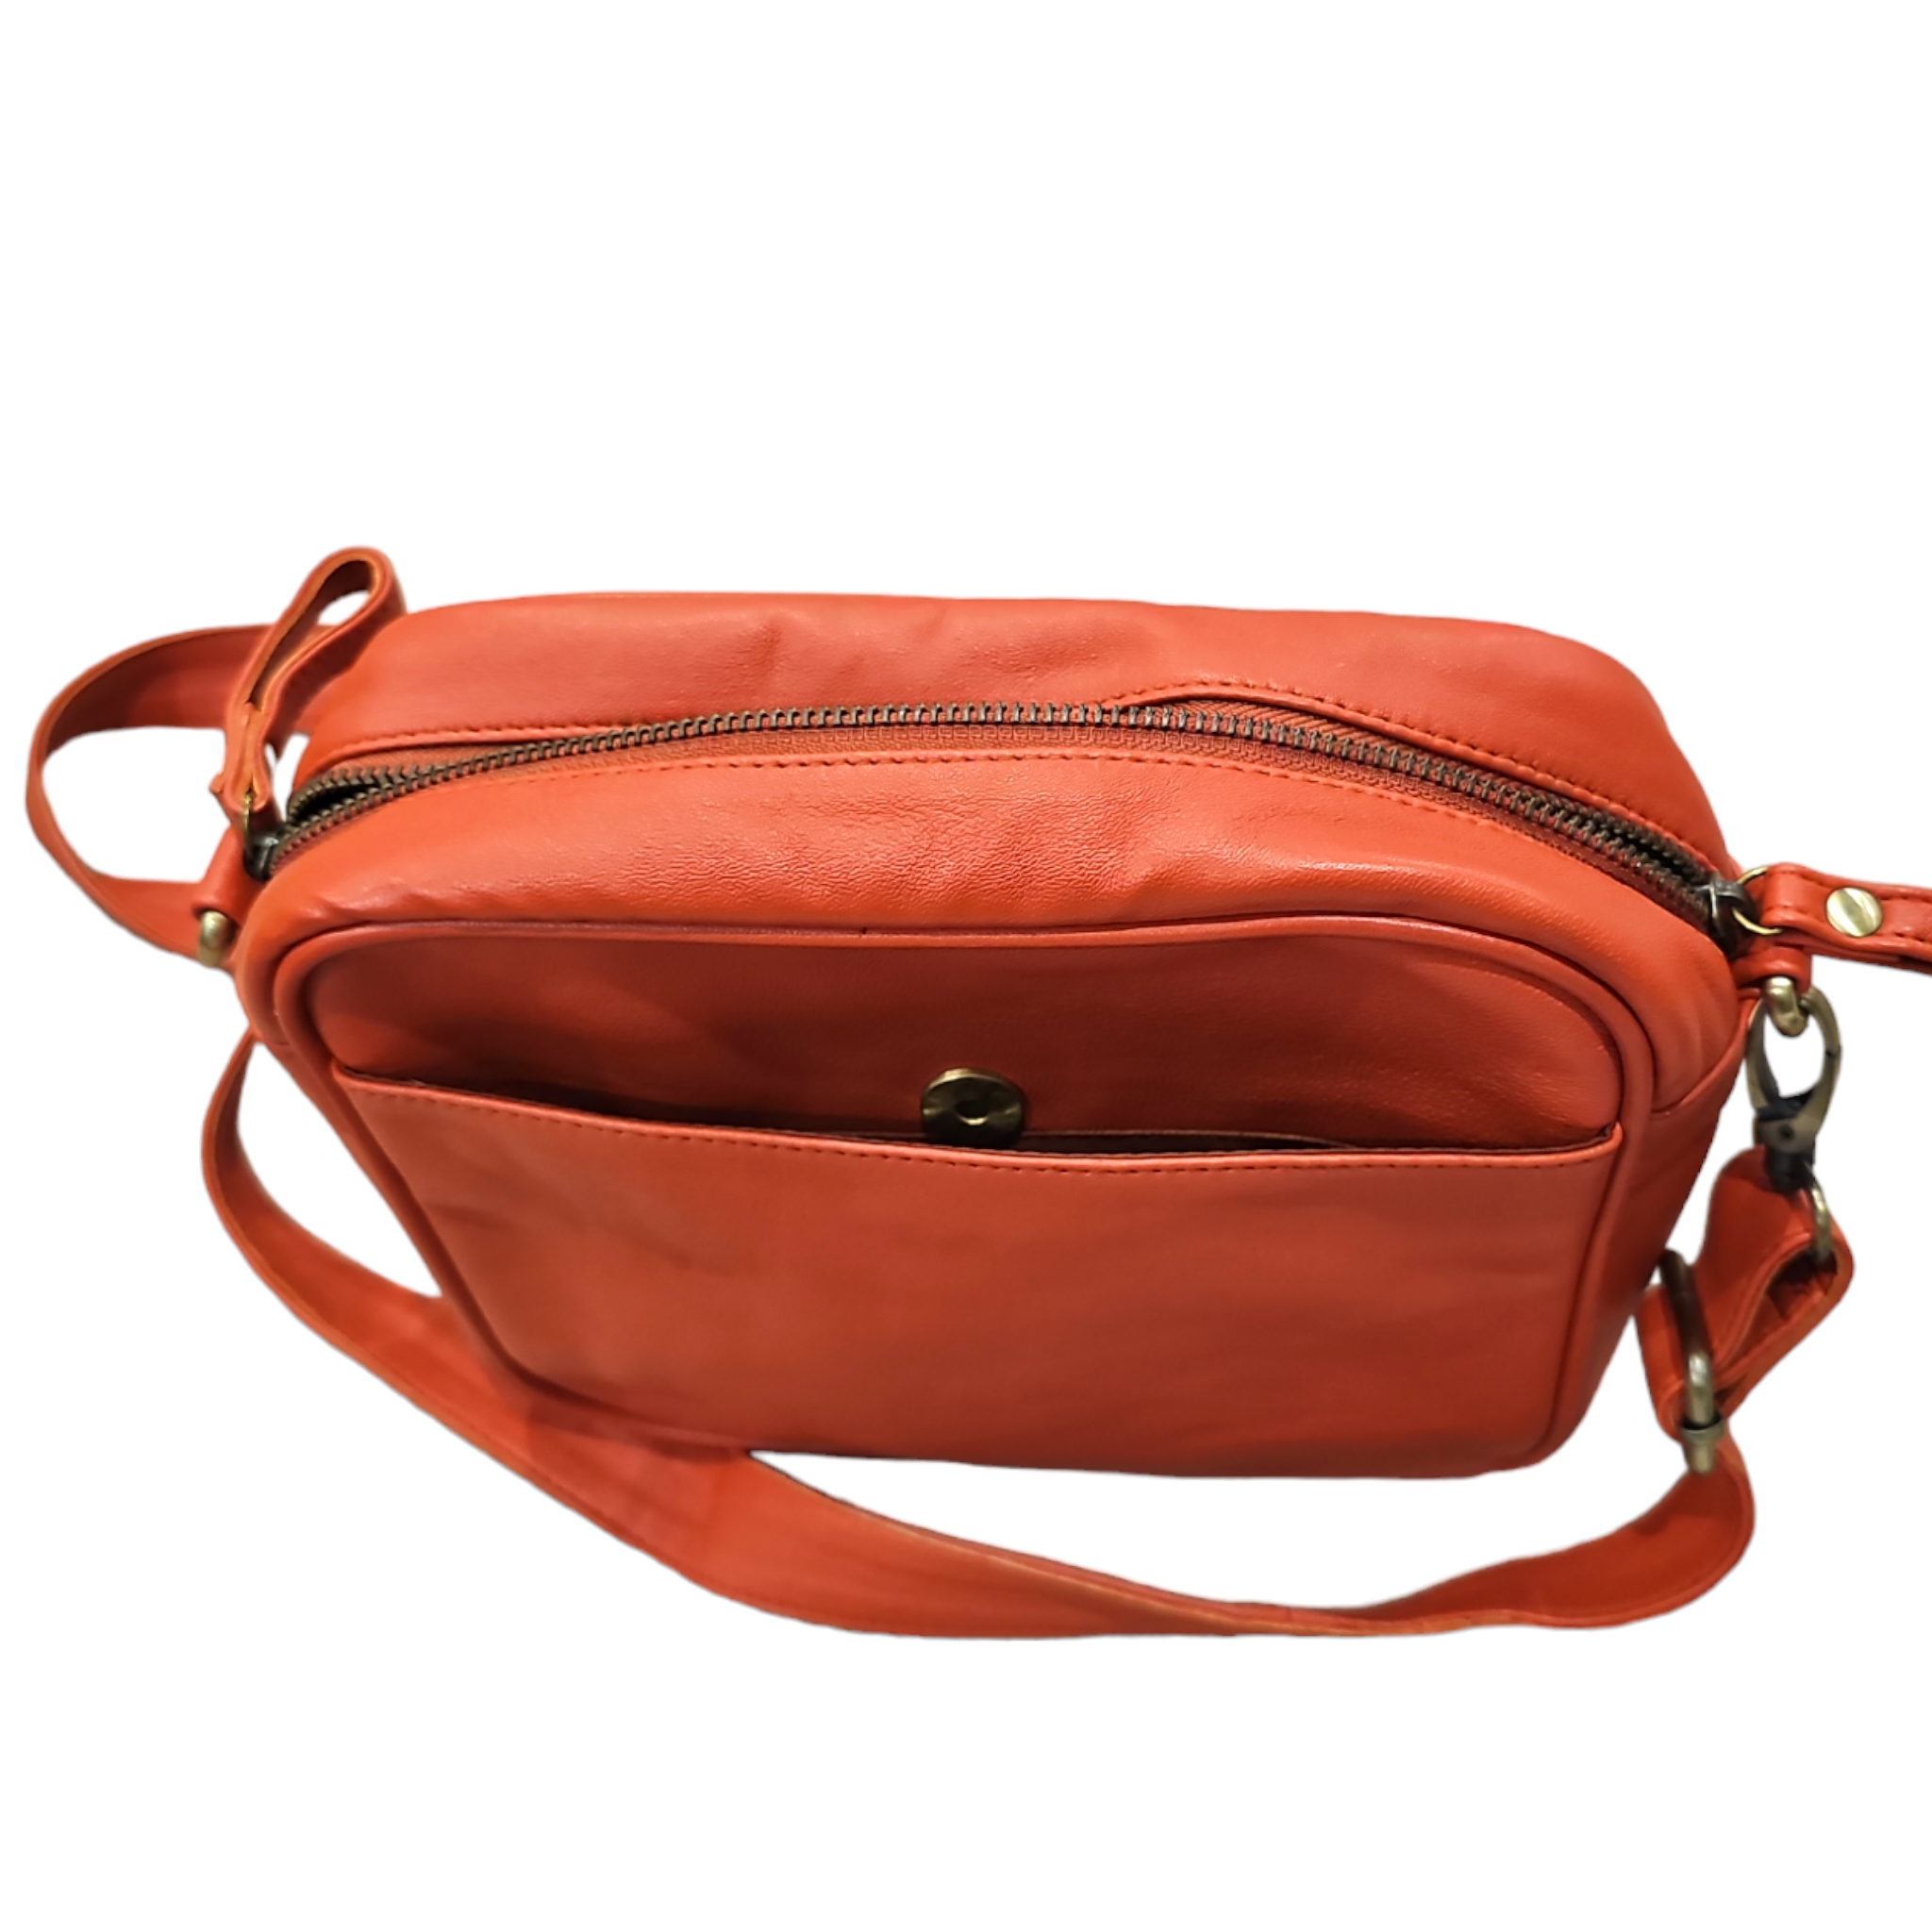 Travel & Living Collection : Leather Bags, Purses and Accessories